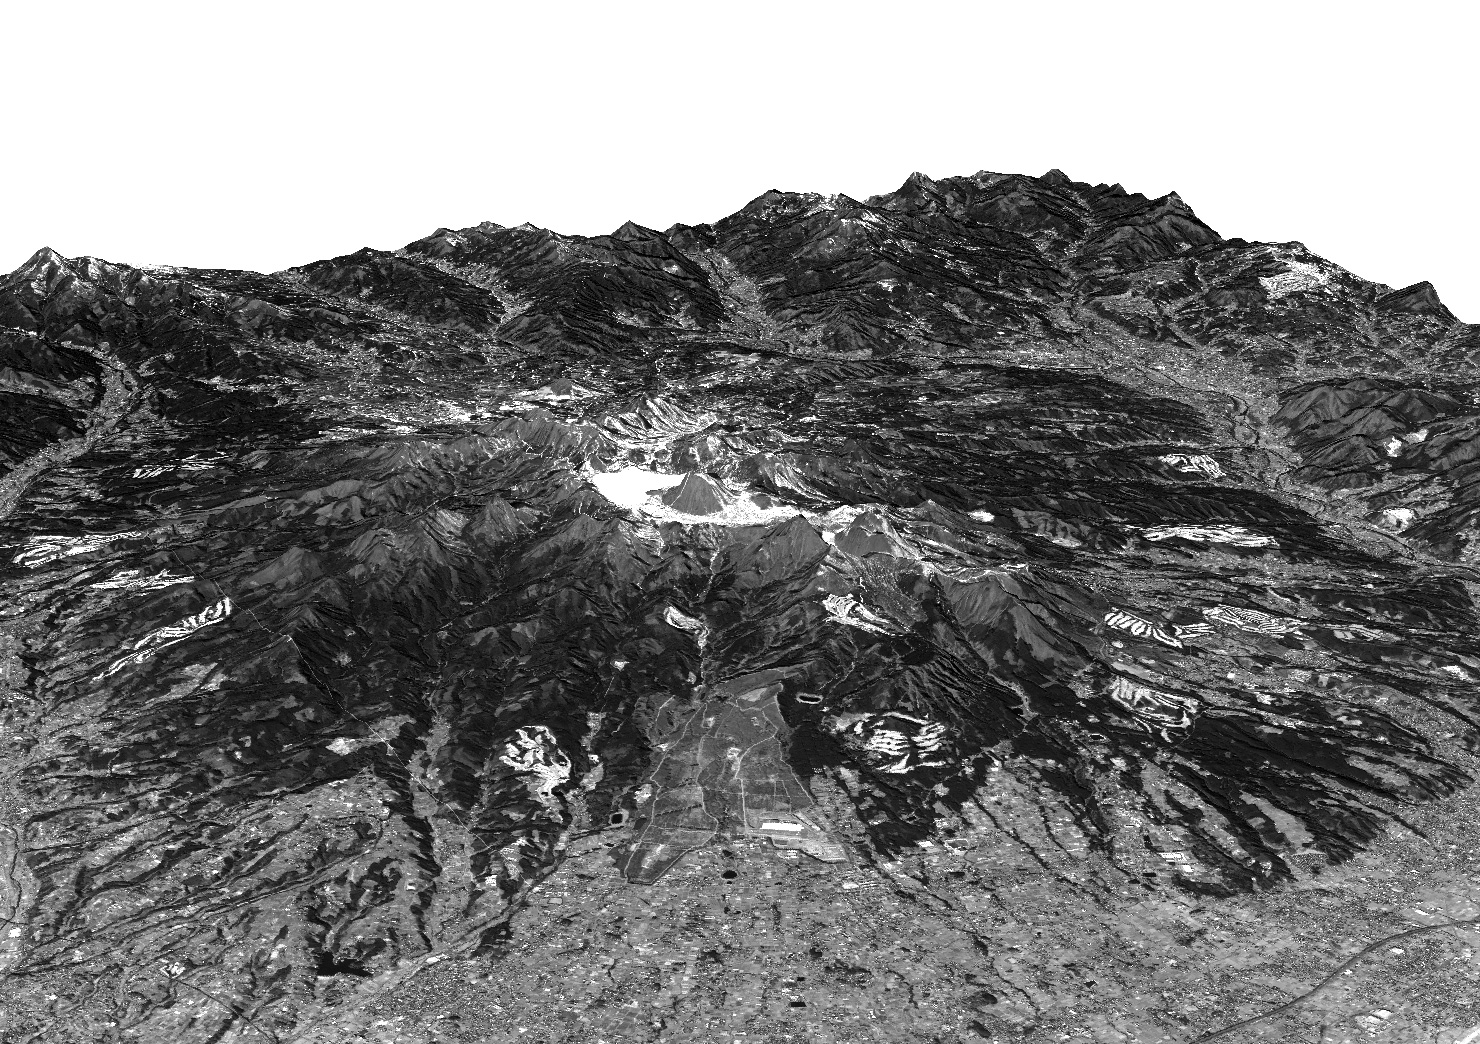 Mt. Haruna observed by the PRISM. (Enlarged Image)